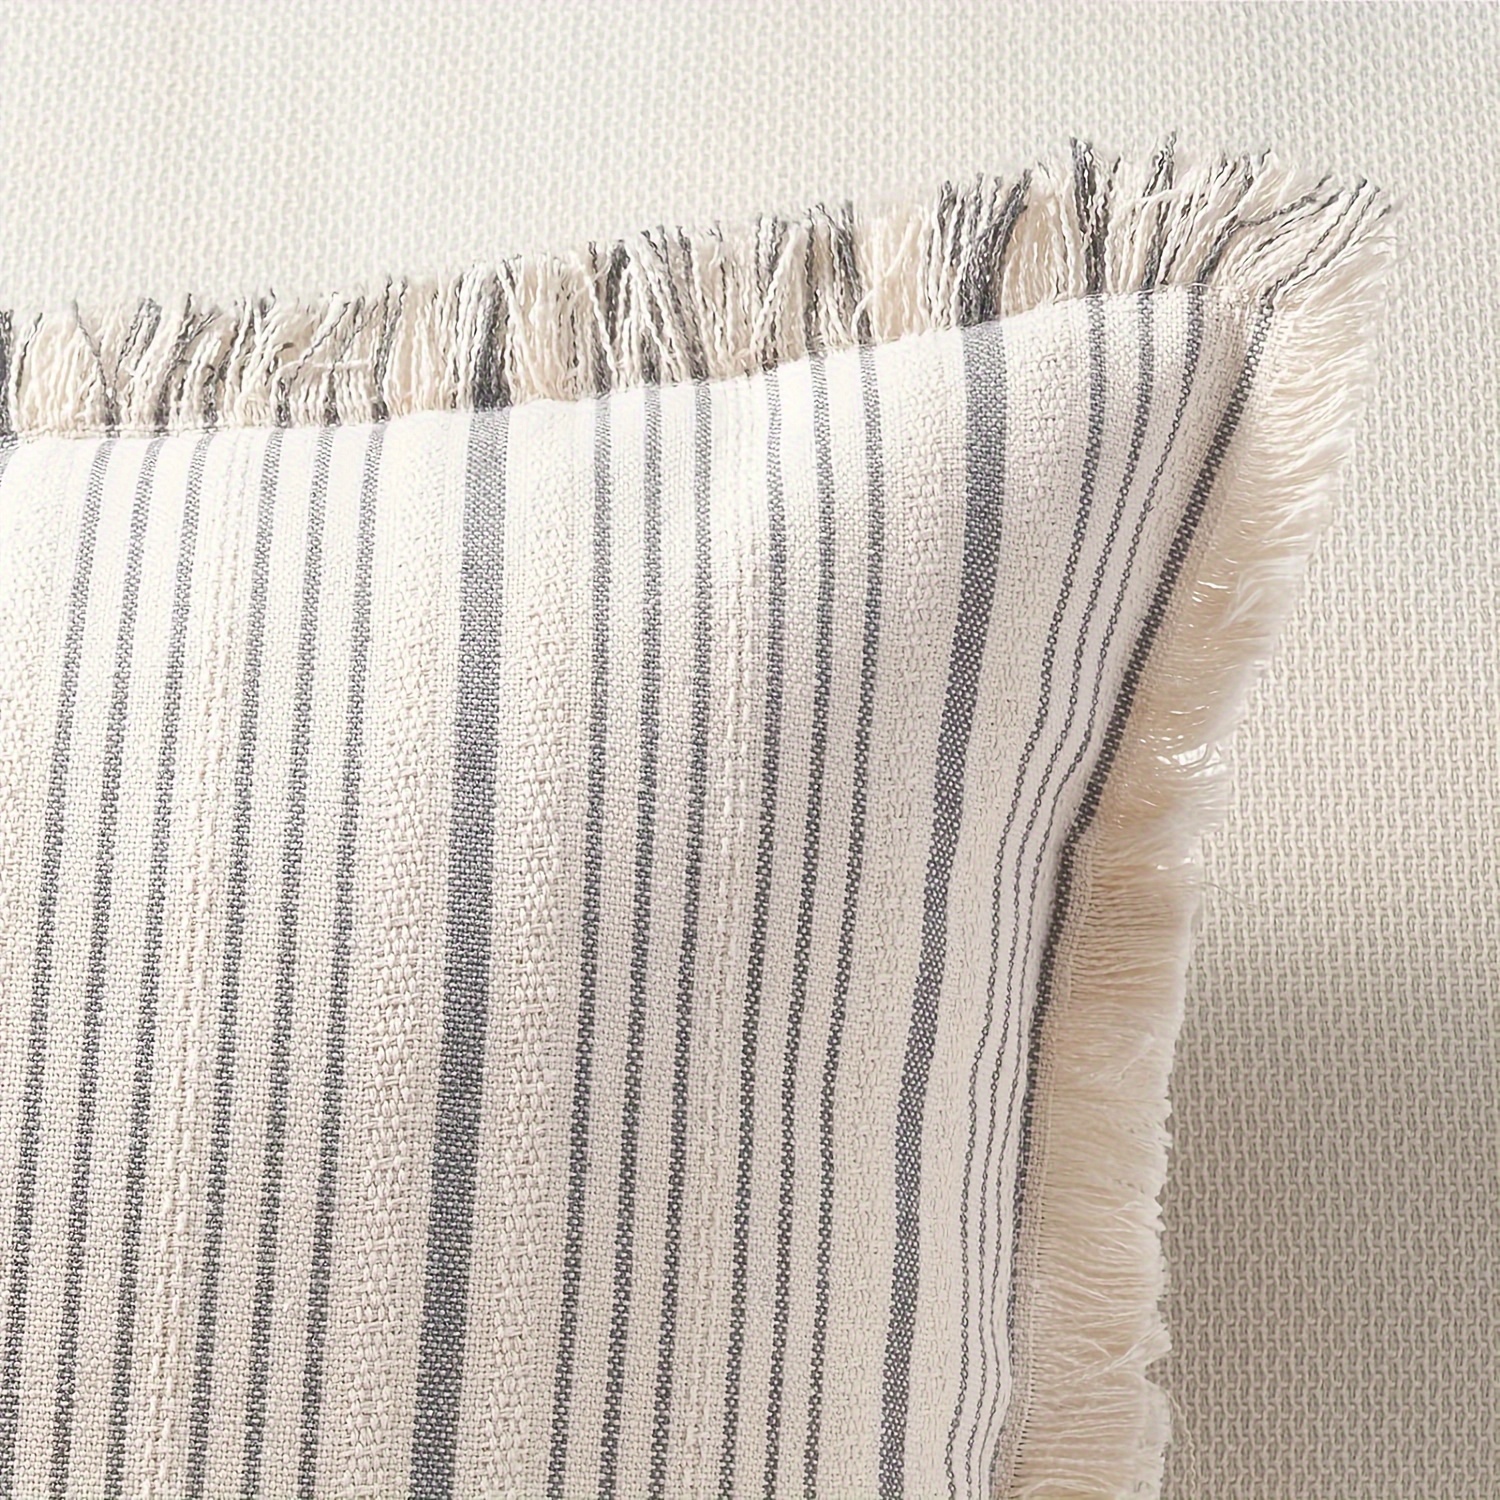 1pc, Stripes Throw Pillow Cover With Tassels, Modern Farmhouse Decorative Fringes Pillow Cover, Boho Textured Linen Pillowcase, Decor Accent Couch Pillow Case, Pillow Cover, Home Decor, Room Decor, Bedroom Decor (Pillow Core Not Included)